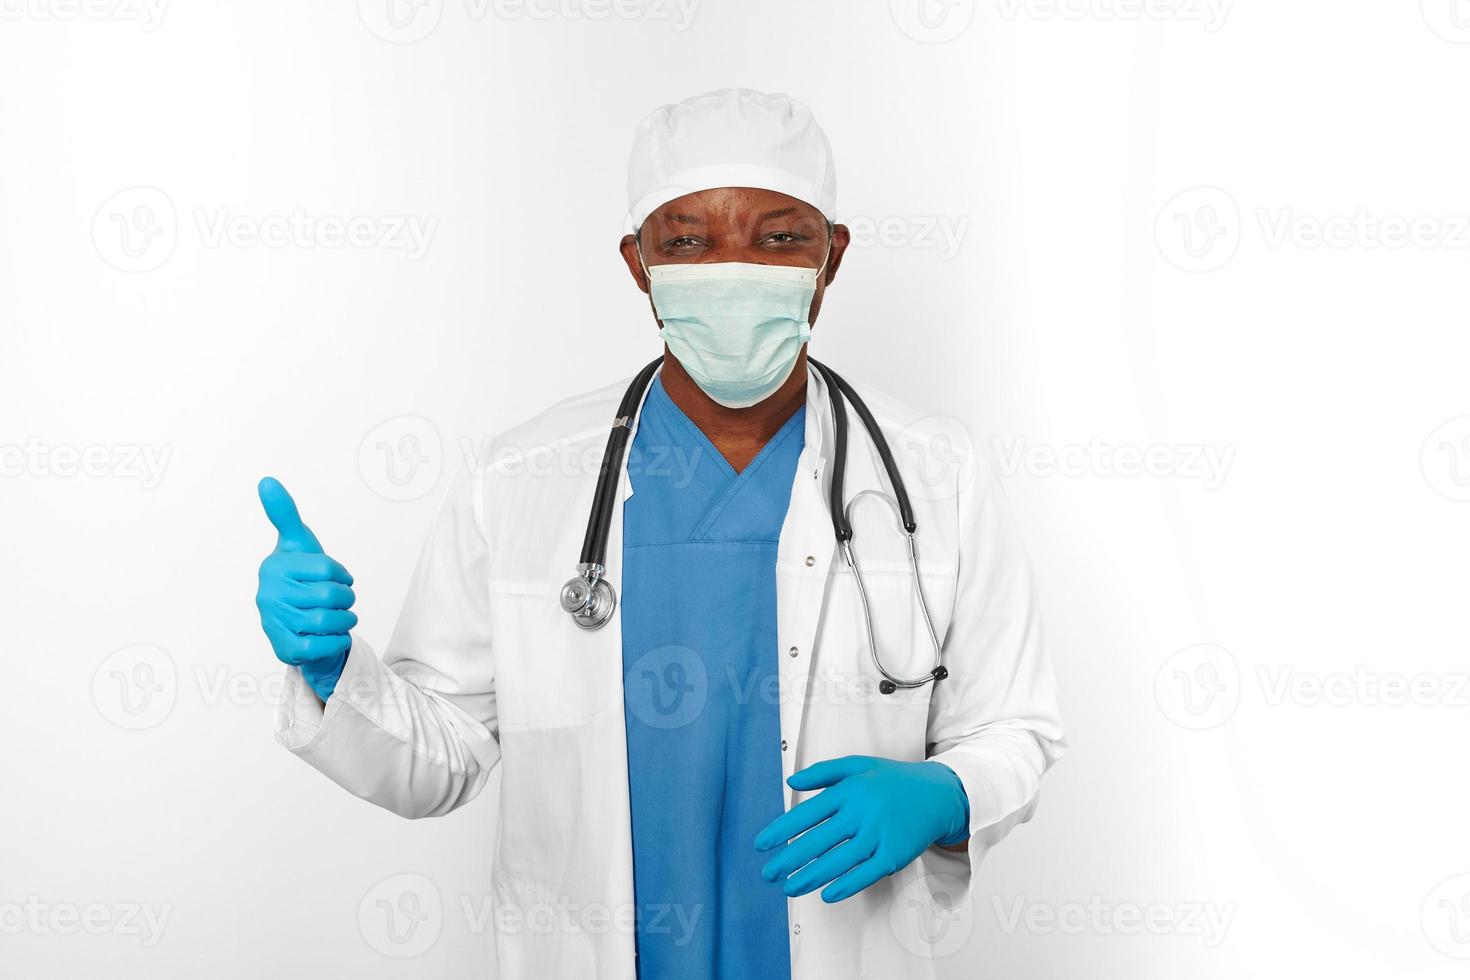 Black surgeon doctor man in white coat gloves white cap and surgeon mask makes thumbs up gesture photo